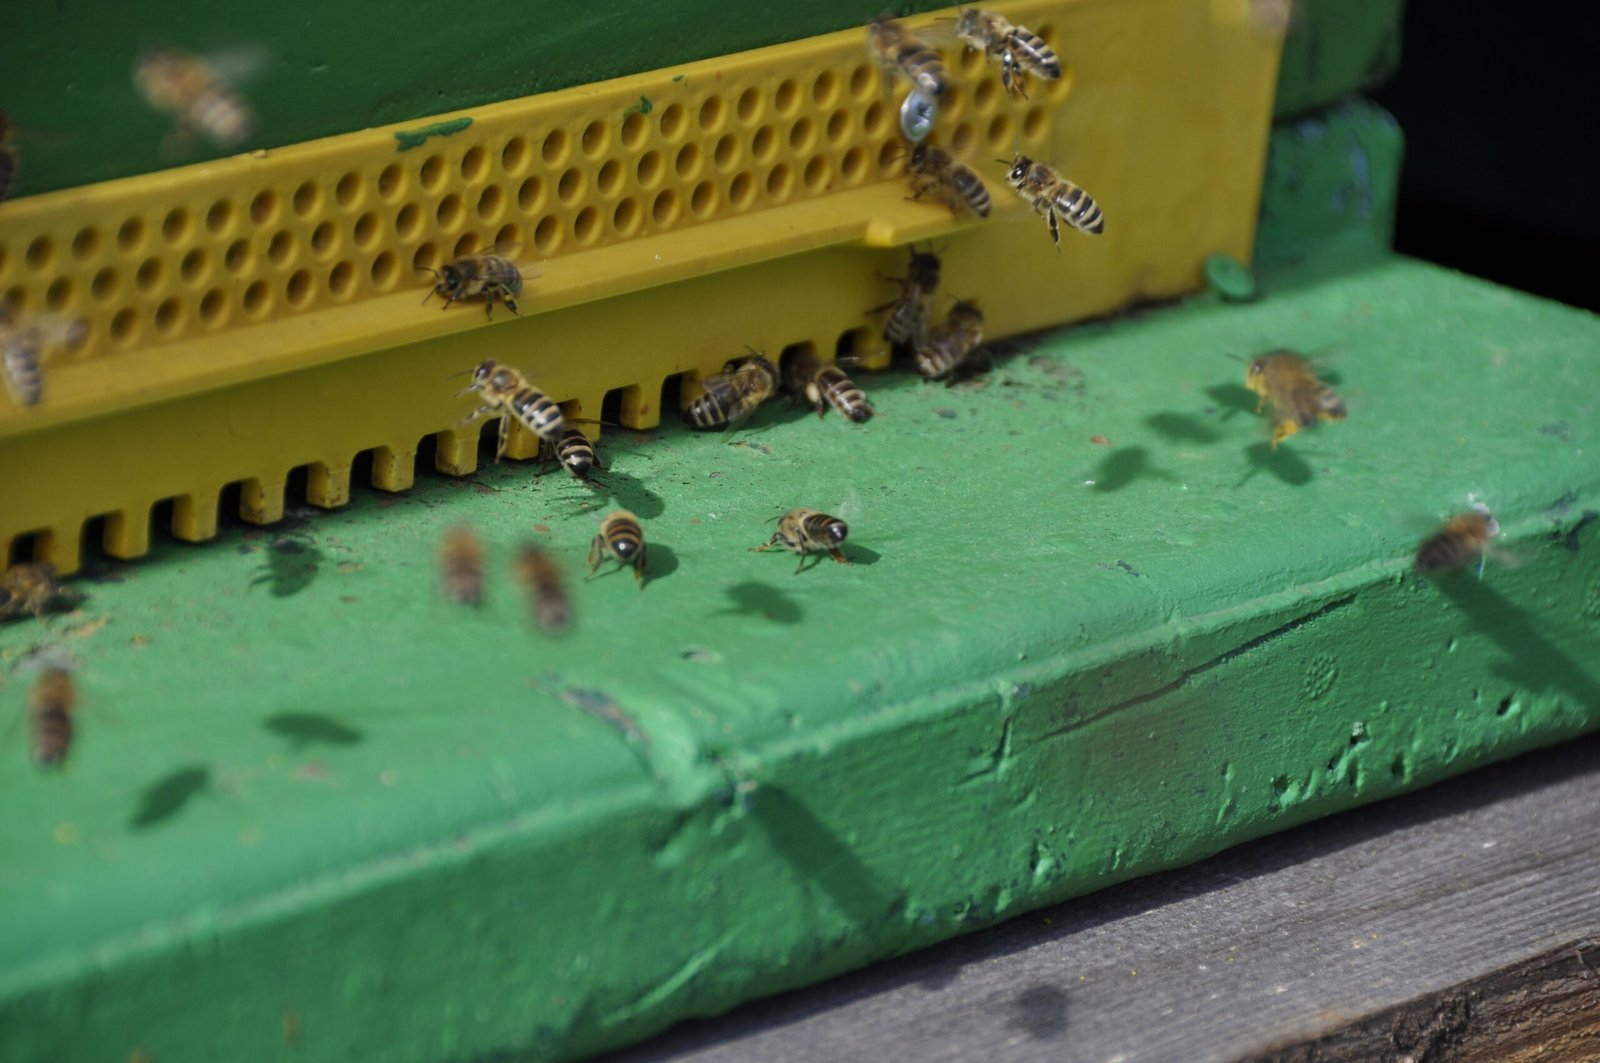 How to Choose the Best Hive Scale: A Buyer’s Guide